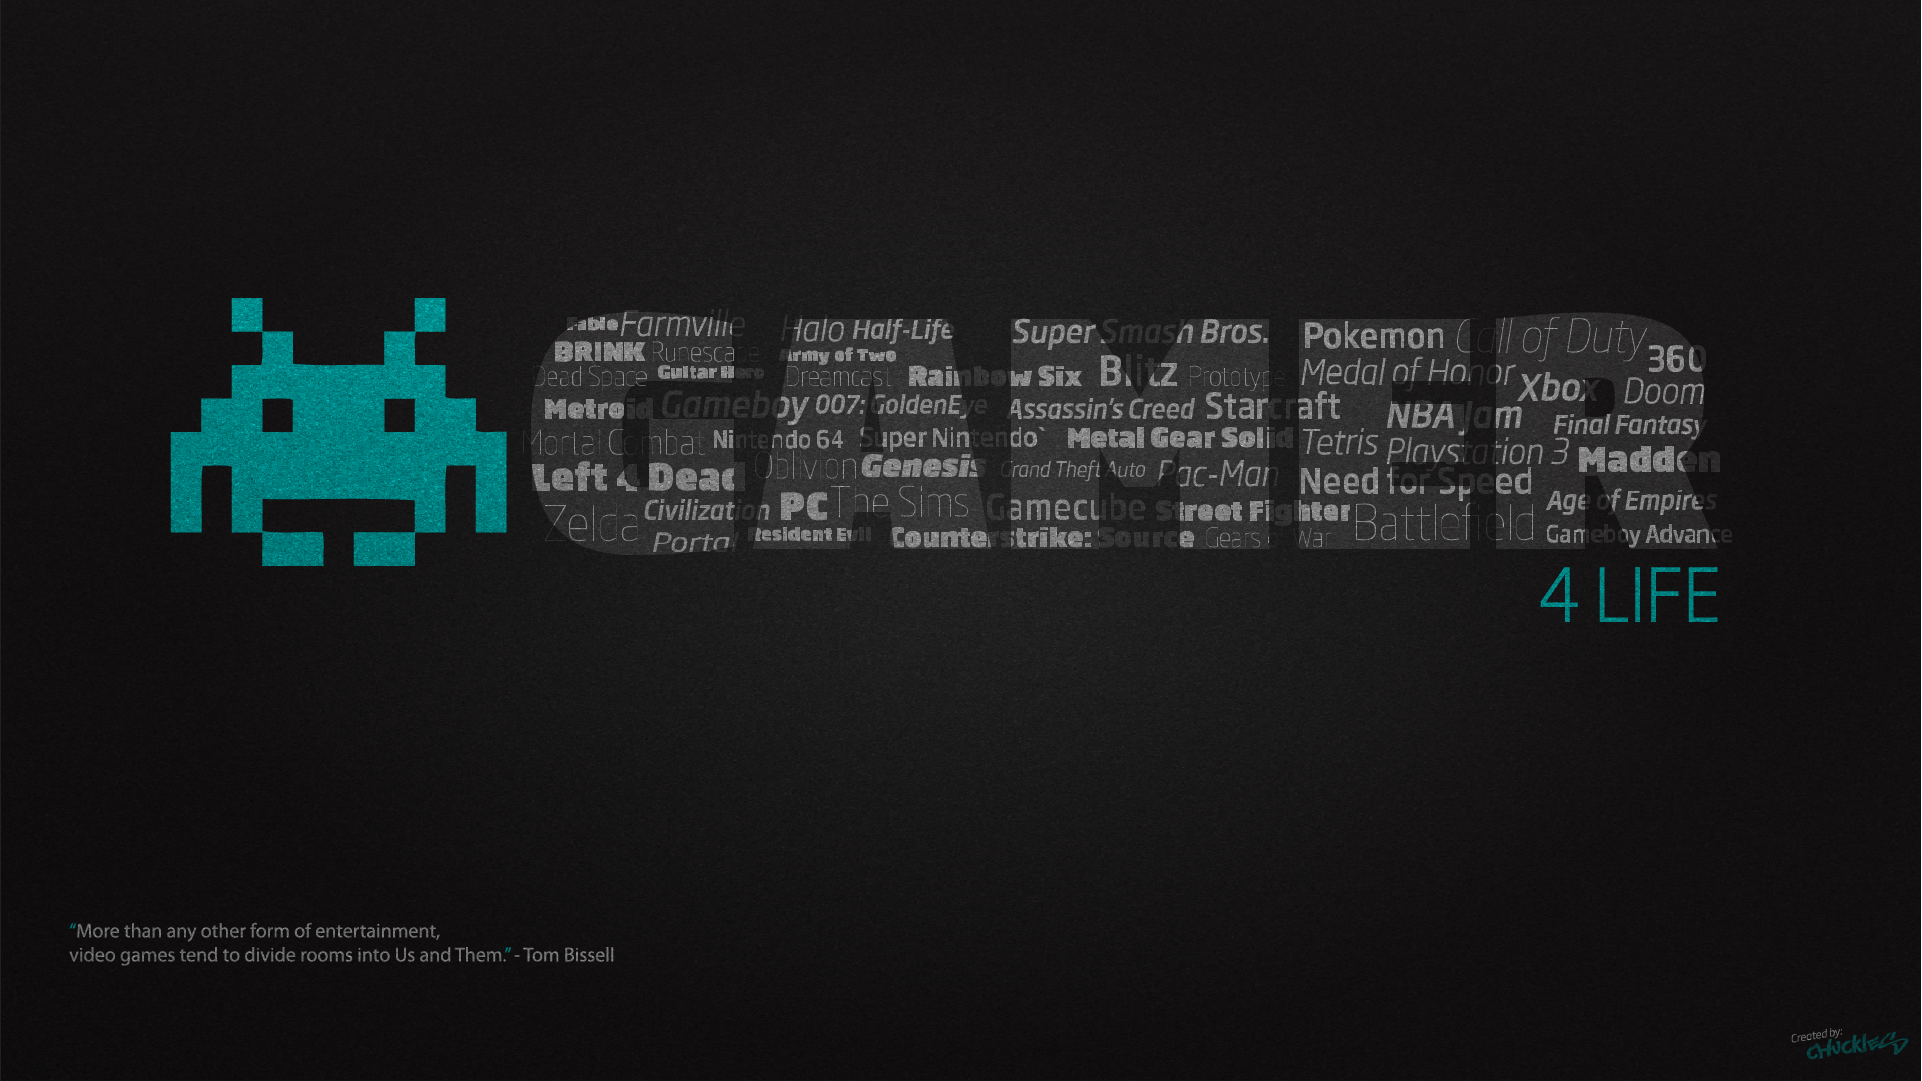 Gamer for Life Desktop Wallpaper 1920x1080 by ChucklesMedia on 1922x1081